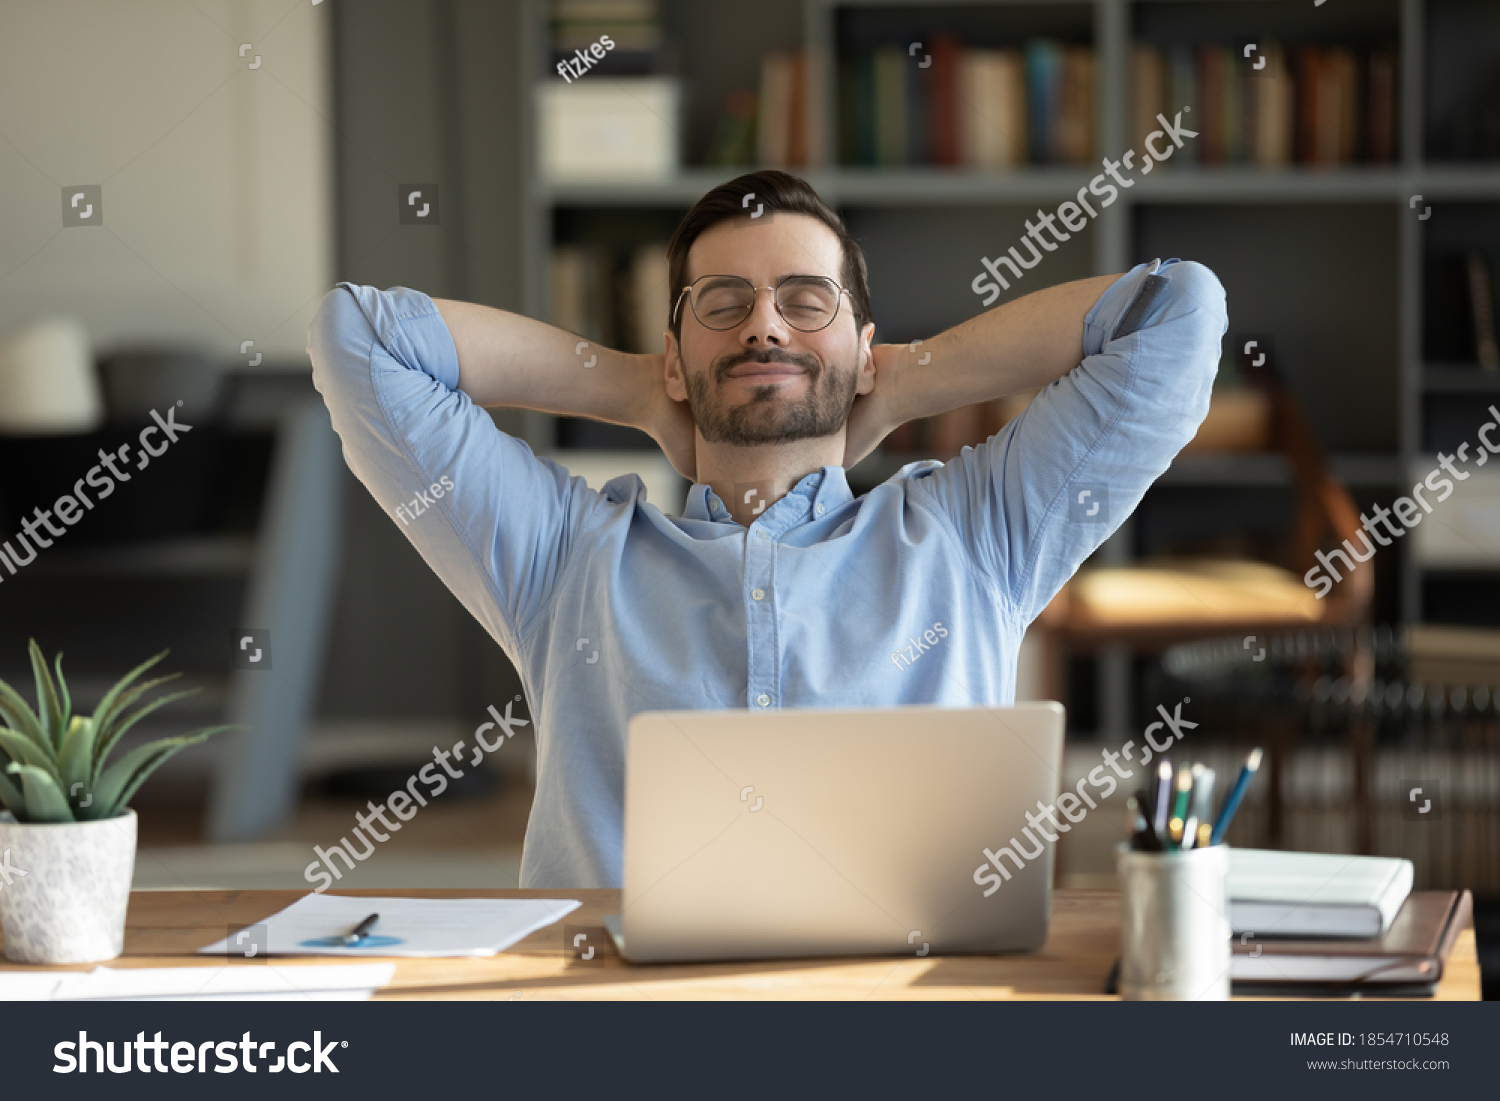 Relaxed man take break from work put hands behind head lean on comfy chair closing eyes feels serenity, enjoy fresh conditioned air in modern office, no stress, fatigue relieve at workplace concept #1854710548